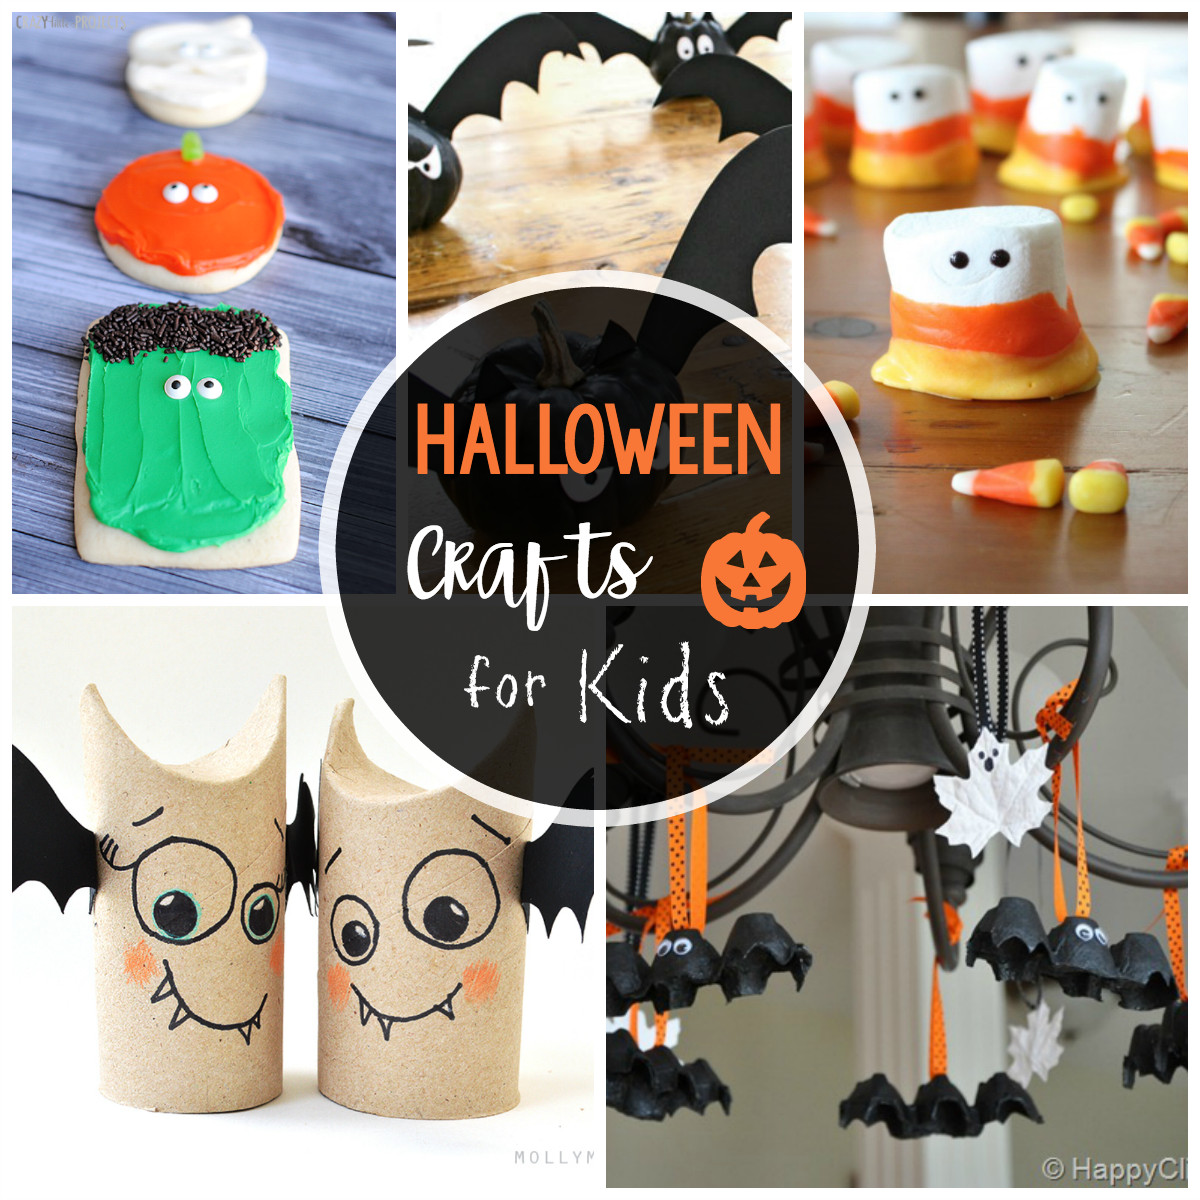 Halloween Crafting Ideas For Kids
 25 Cute & Easy Halloween Crafts for Kids Crazy Little